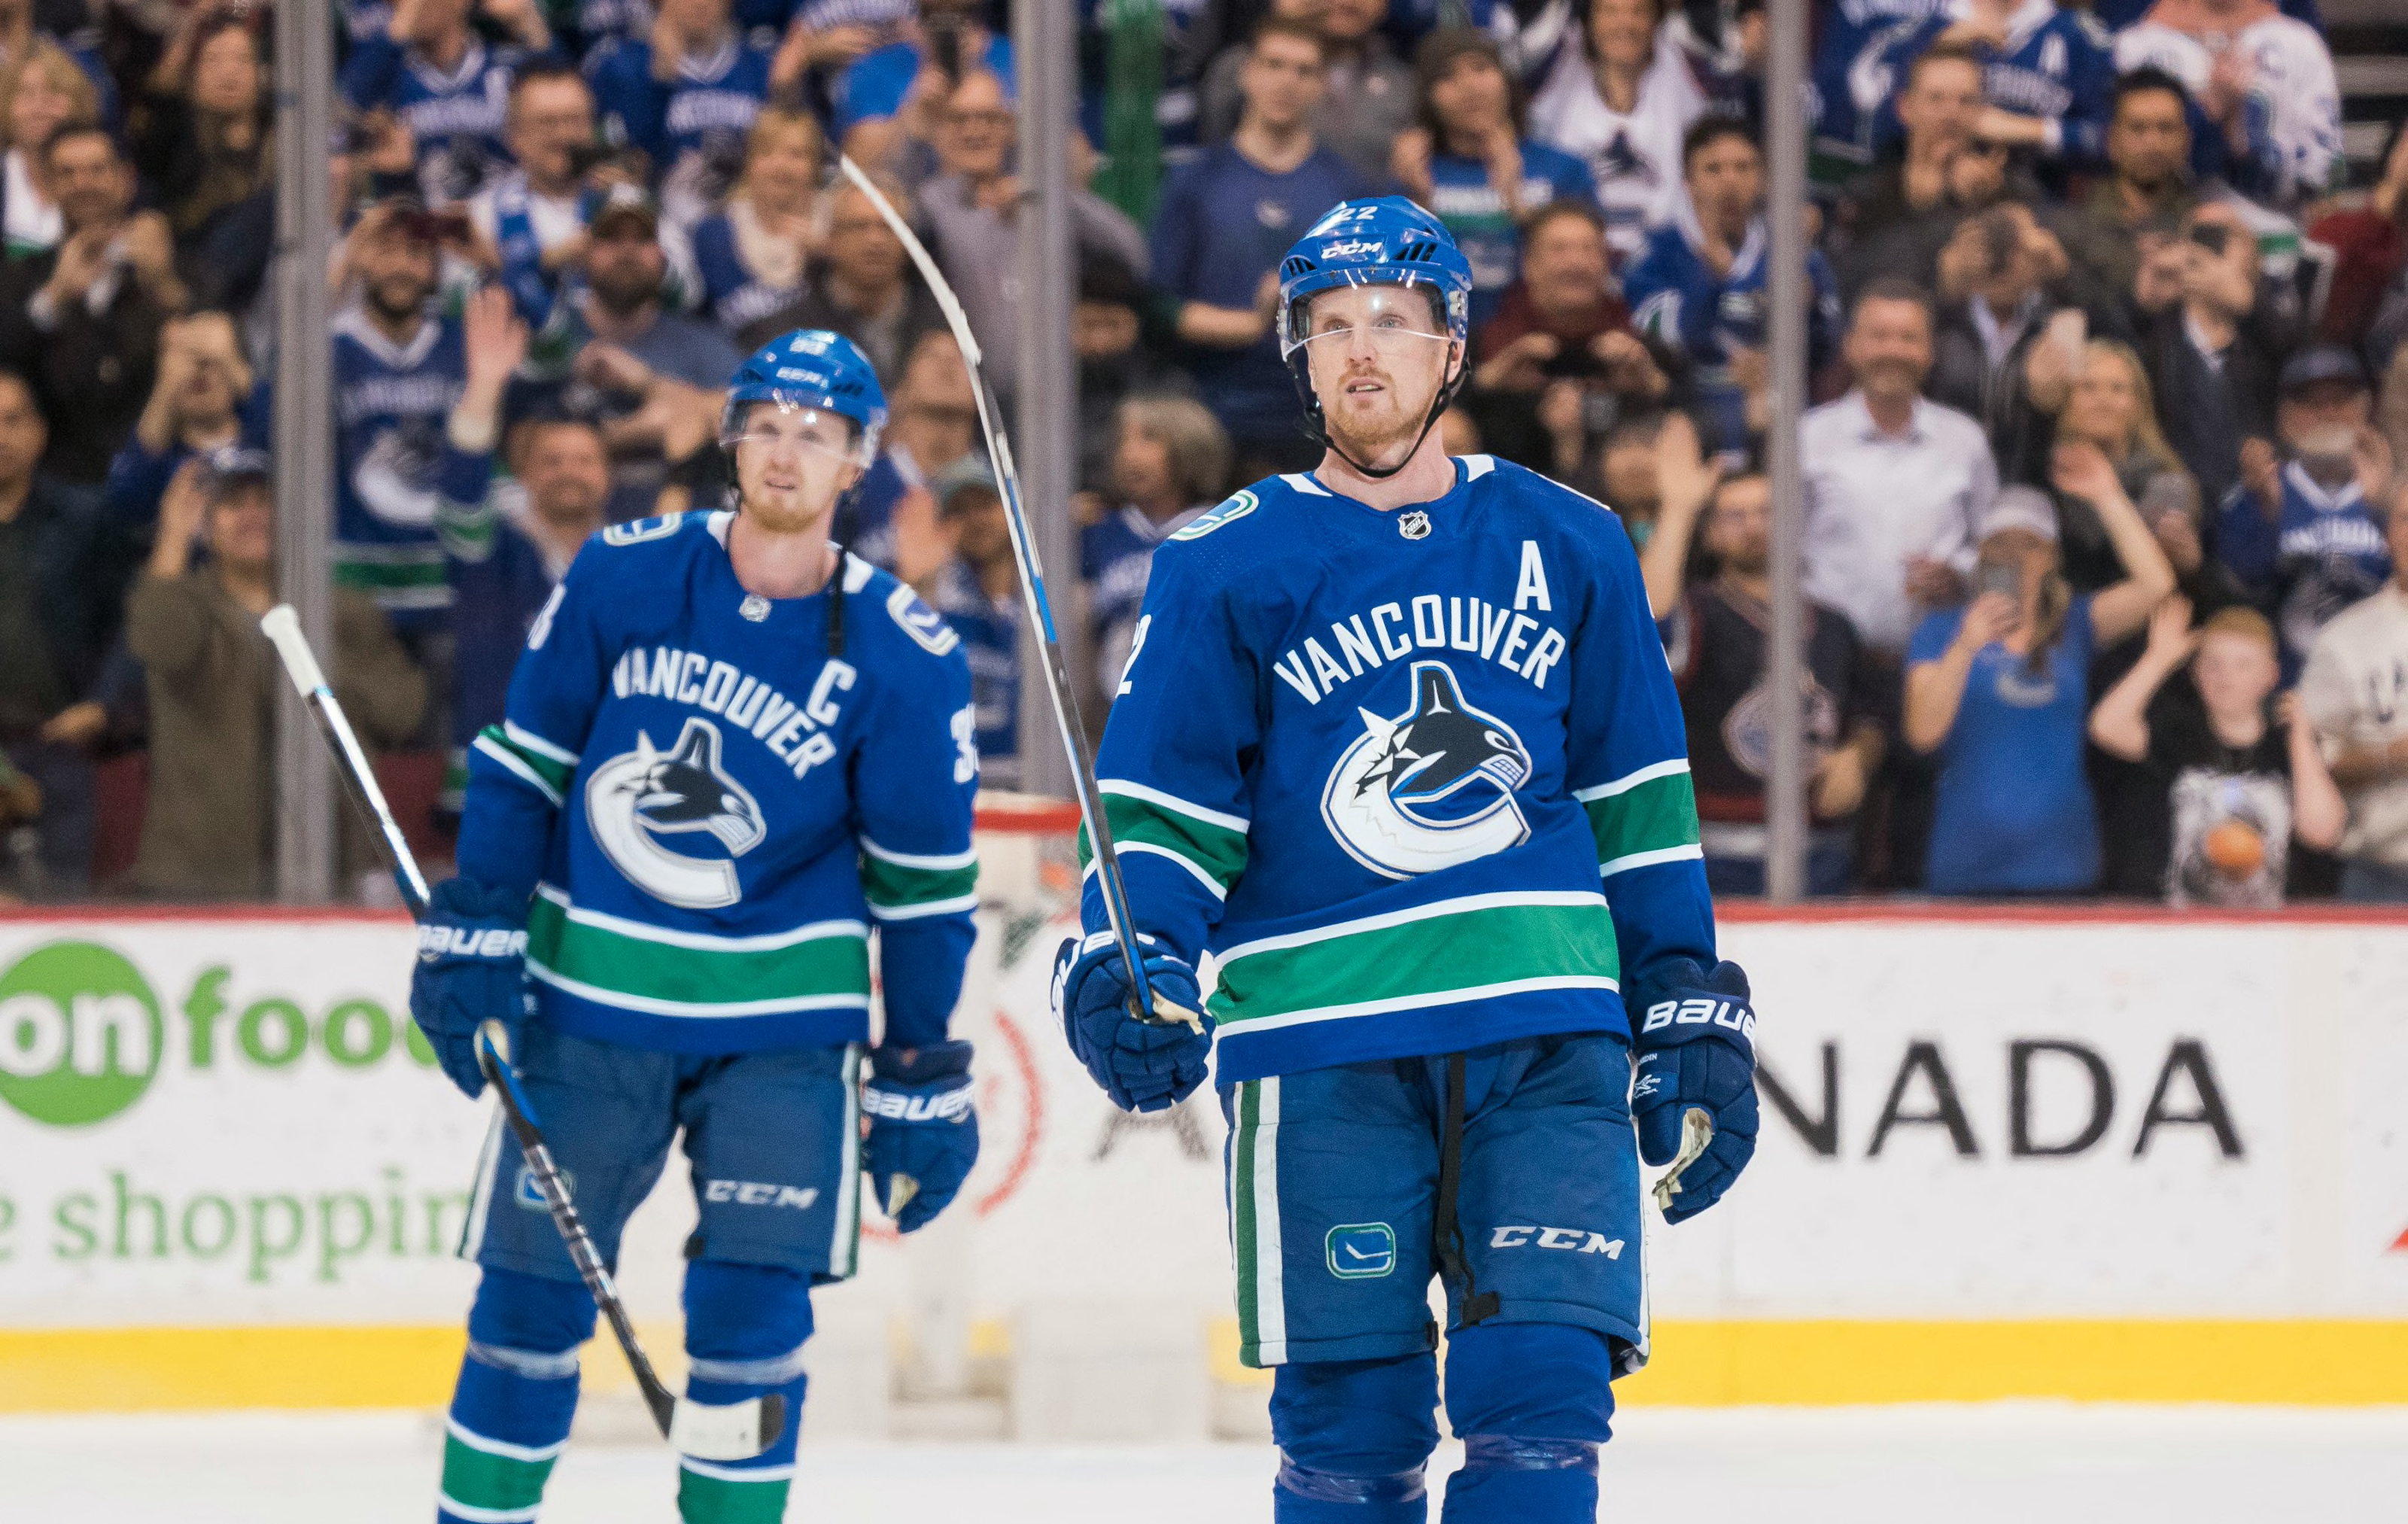 Sedin Brothers (Vancouver Canucks Jersey Retirement) iPhon…